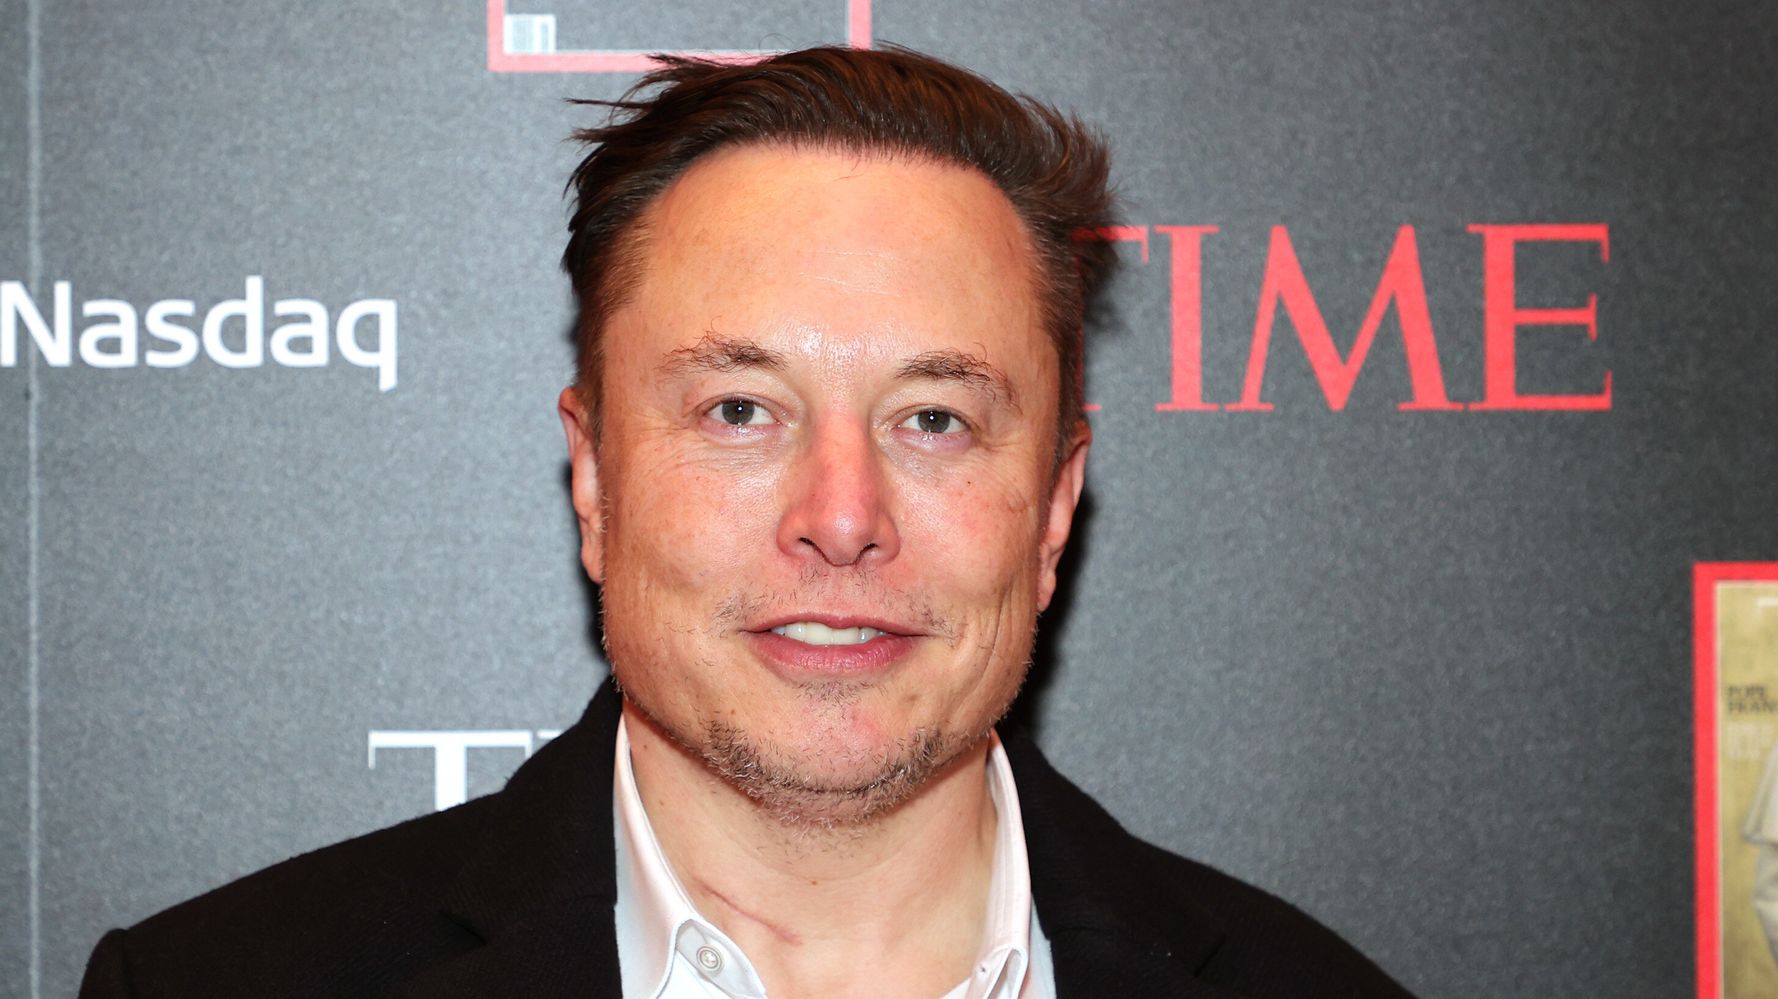 Twitter Users Greet New Overlord Elon Musk By Roasting Him Alive